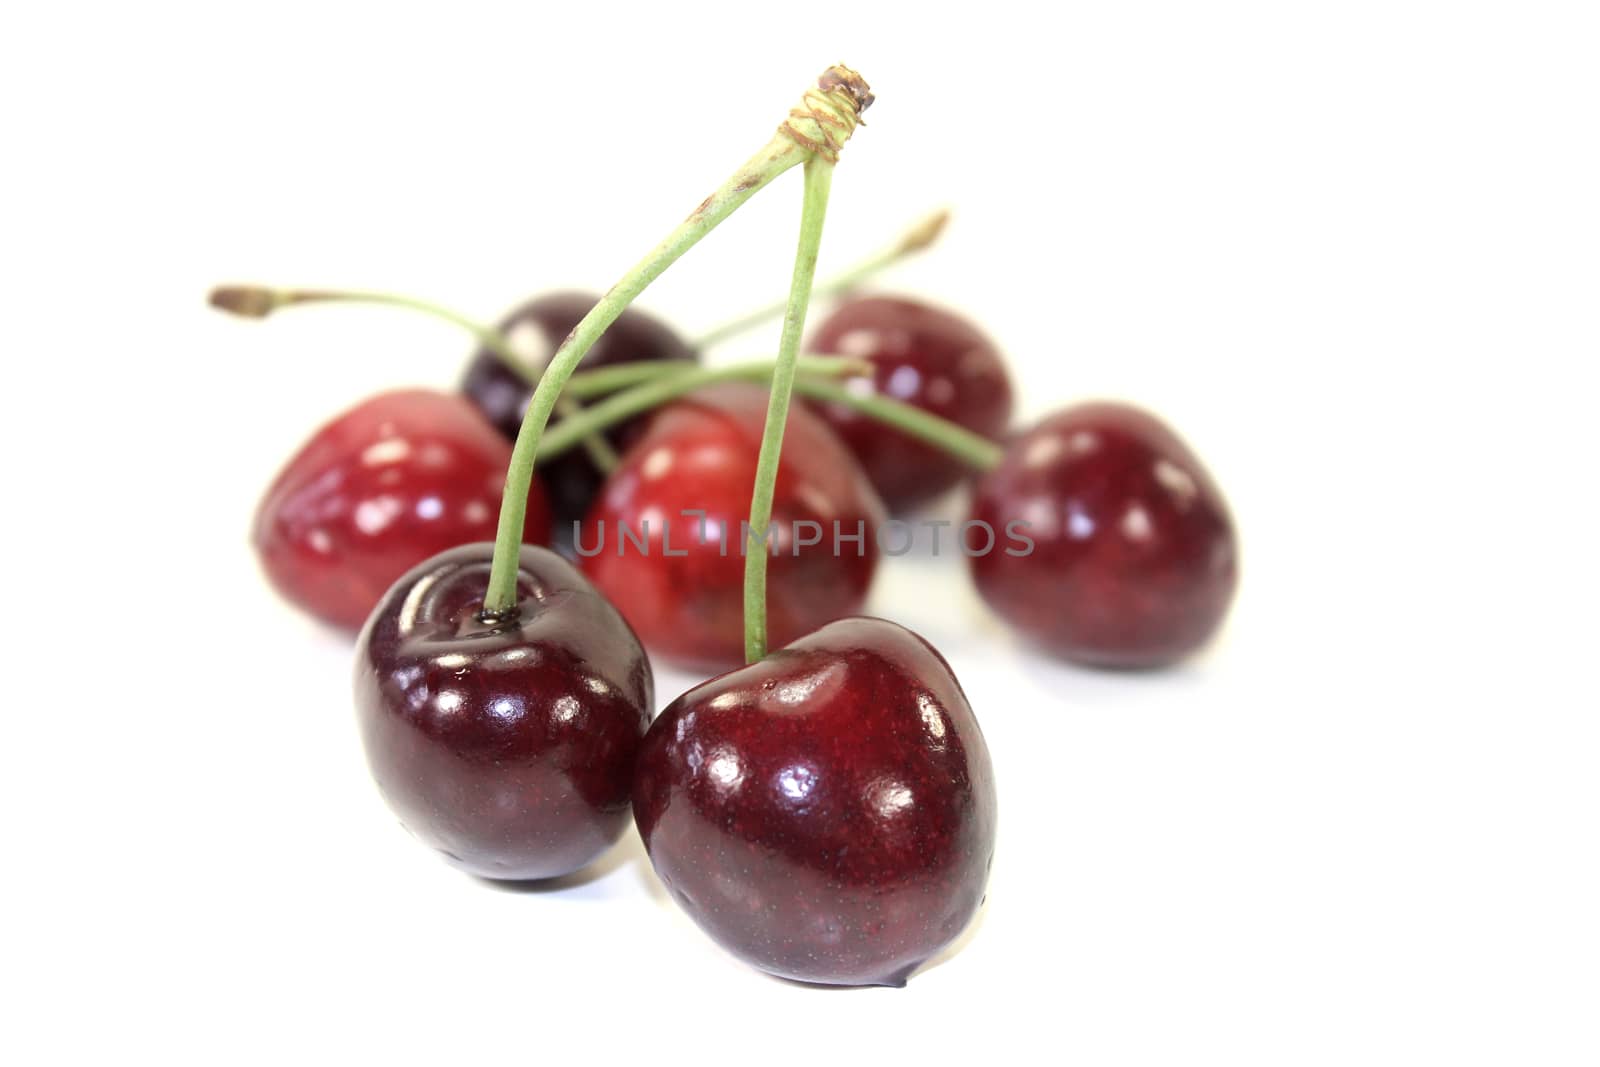 fresh red juicy cherries by discovery